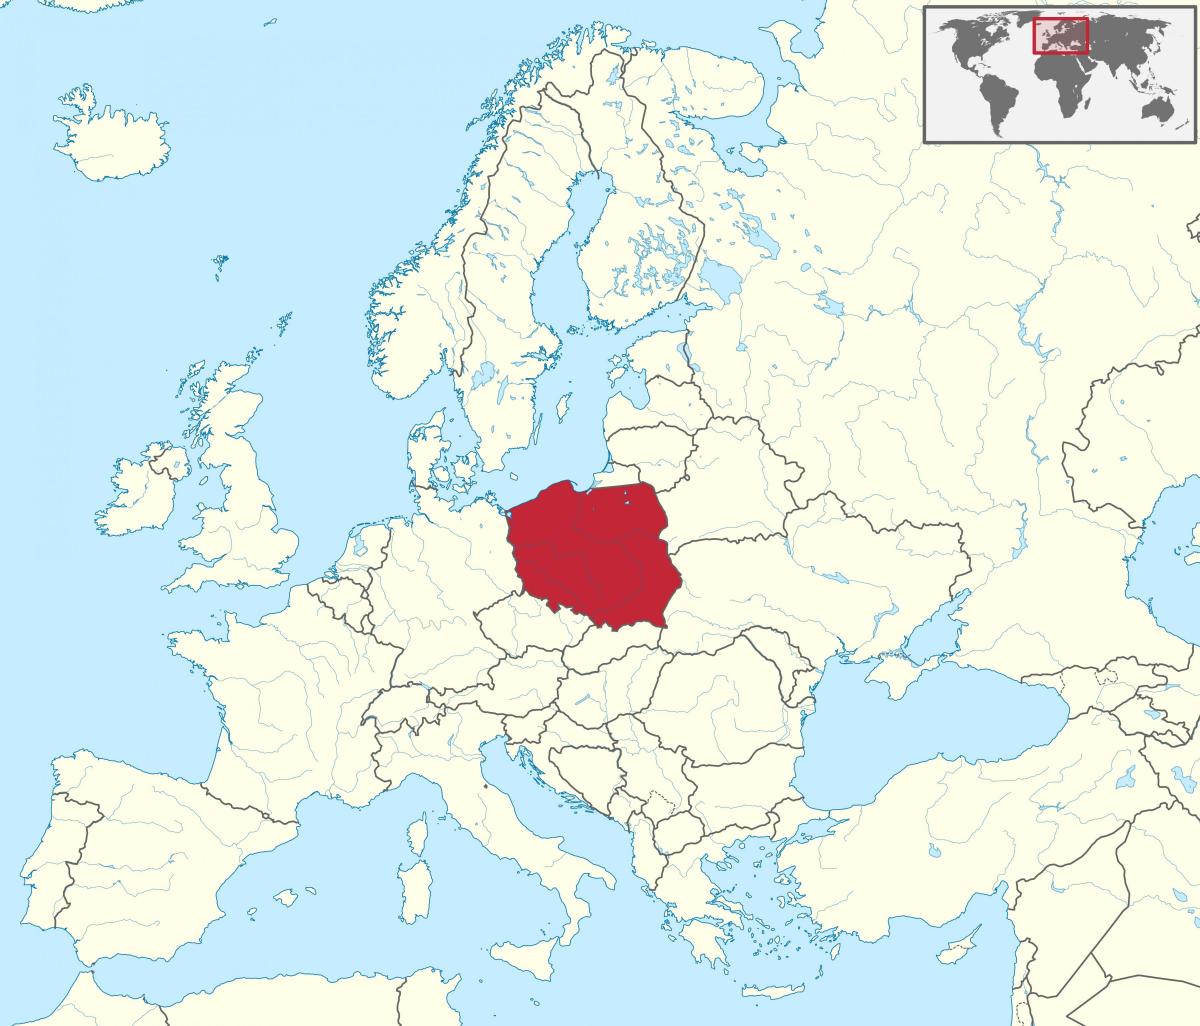 Poland location on the Europe map